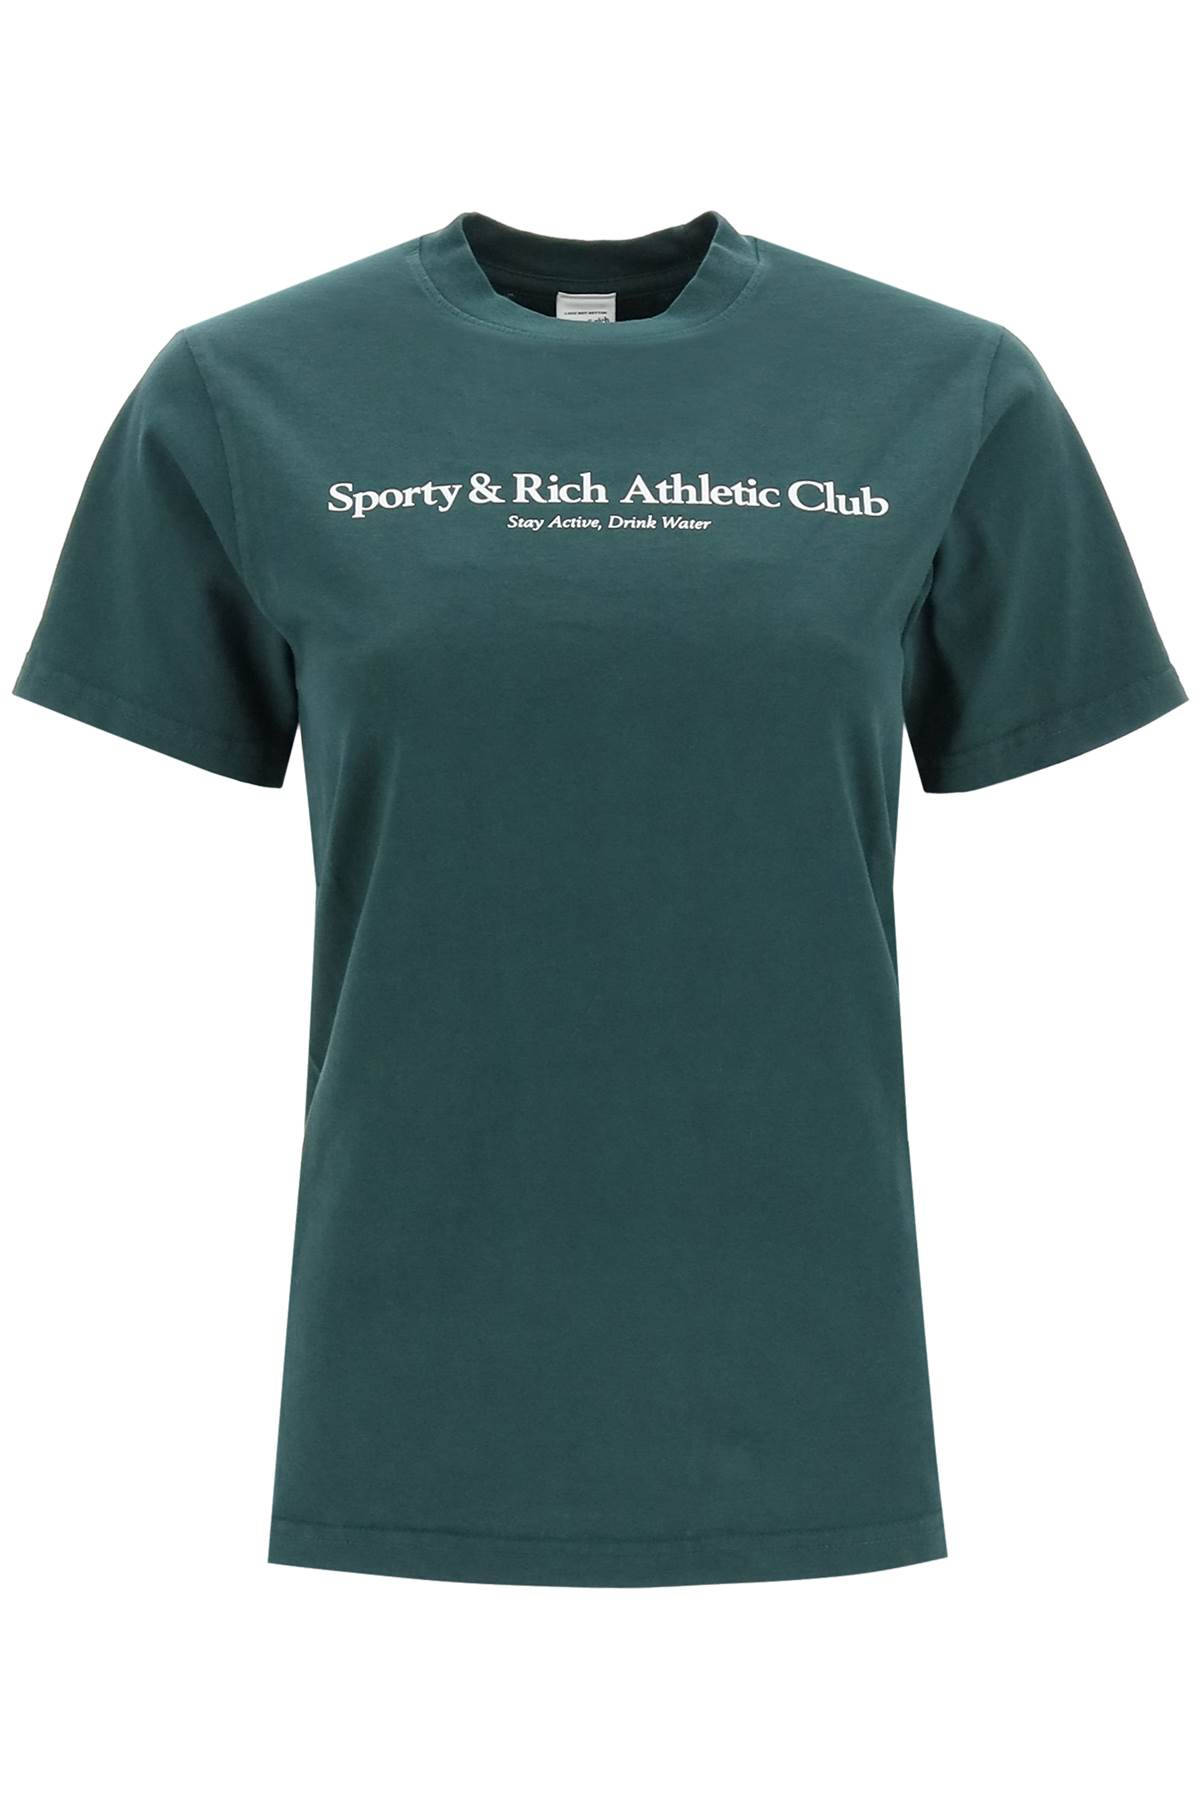 Sporty & Rich stay Active, Drink Water T-shirt